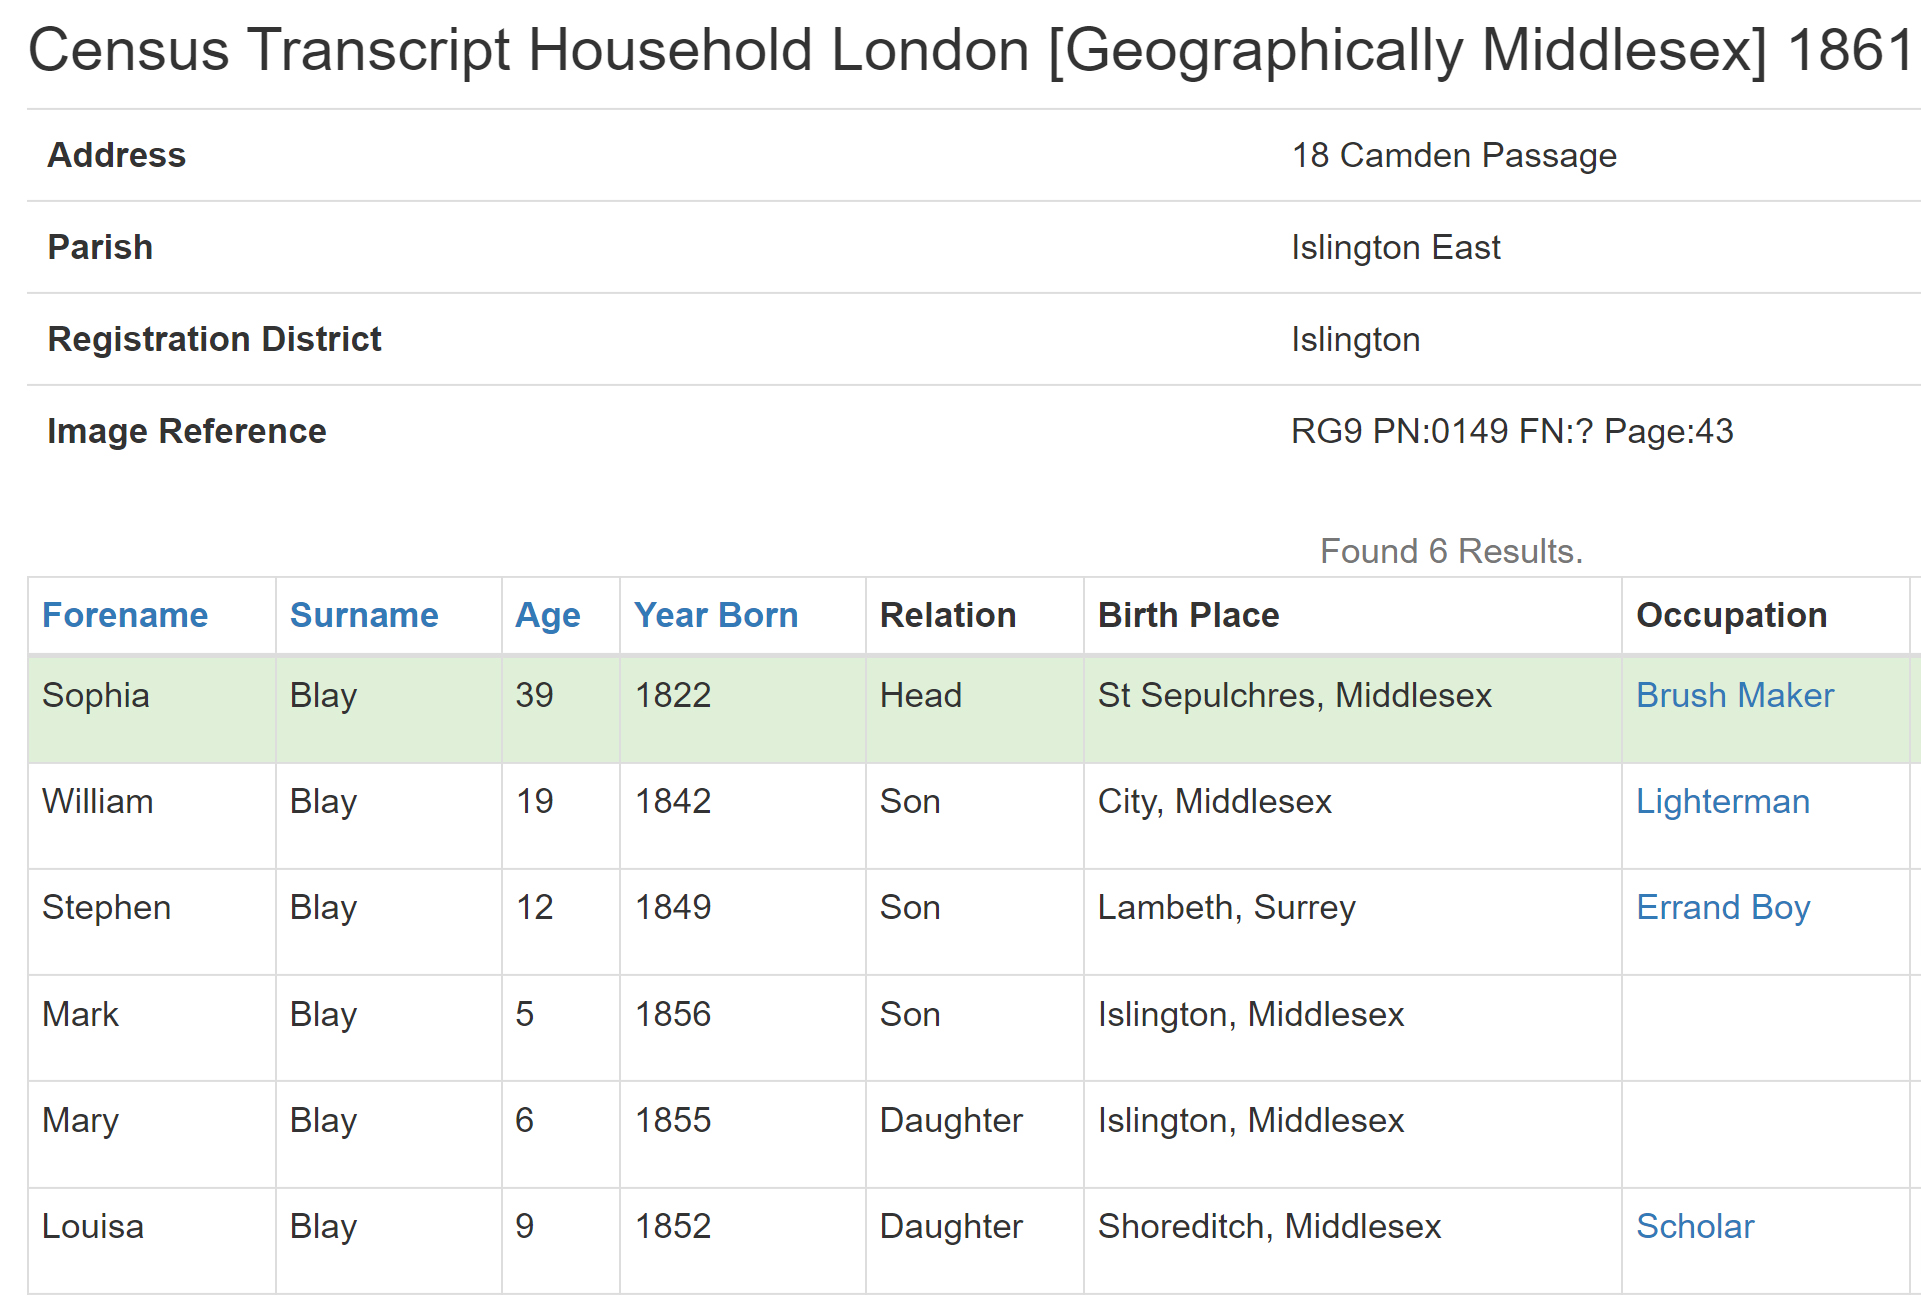 Sophie Blay in the London 1861 Census